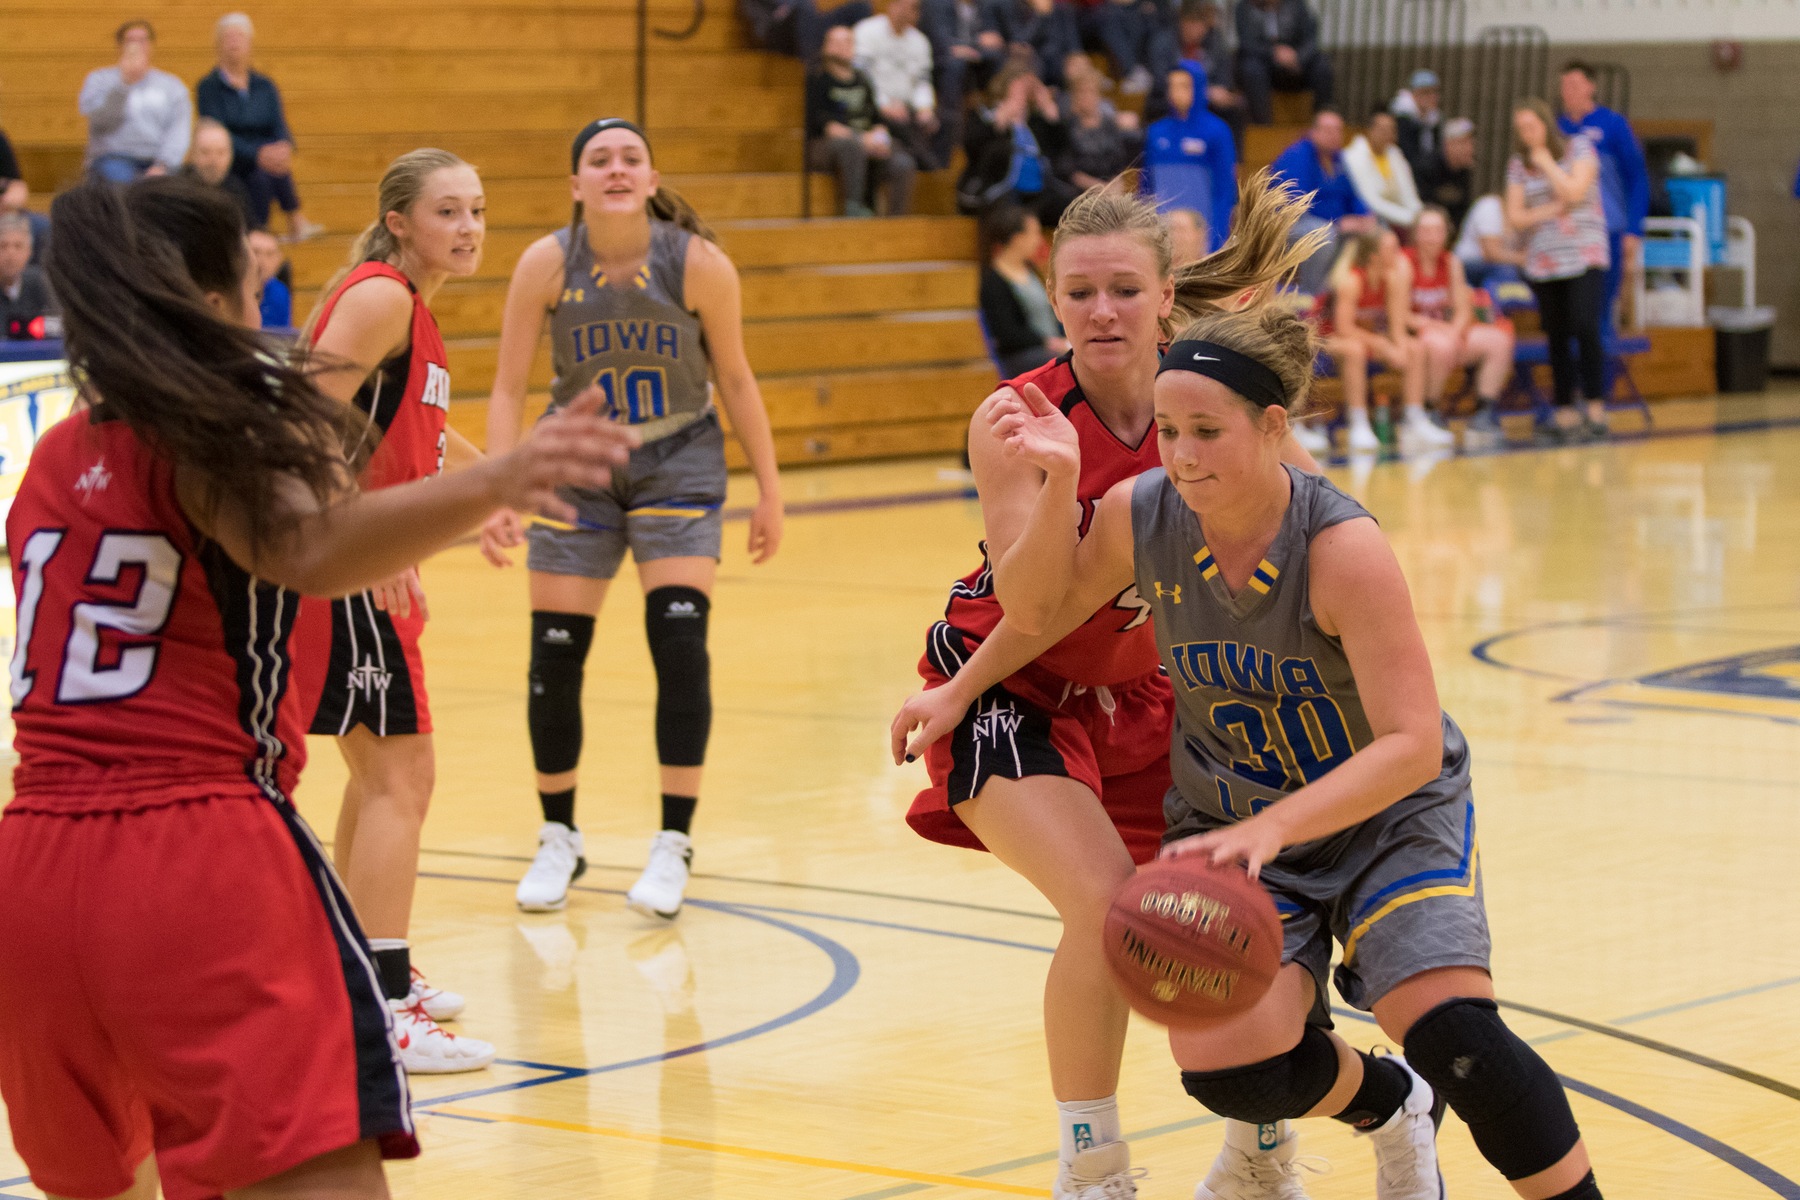 Lakers get Overtime Win Over Mount Marty JV